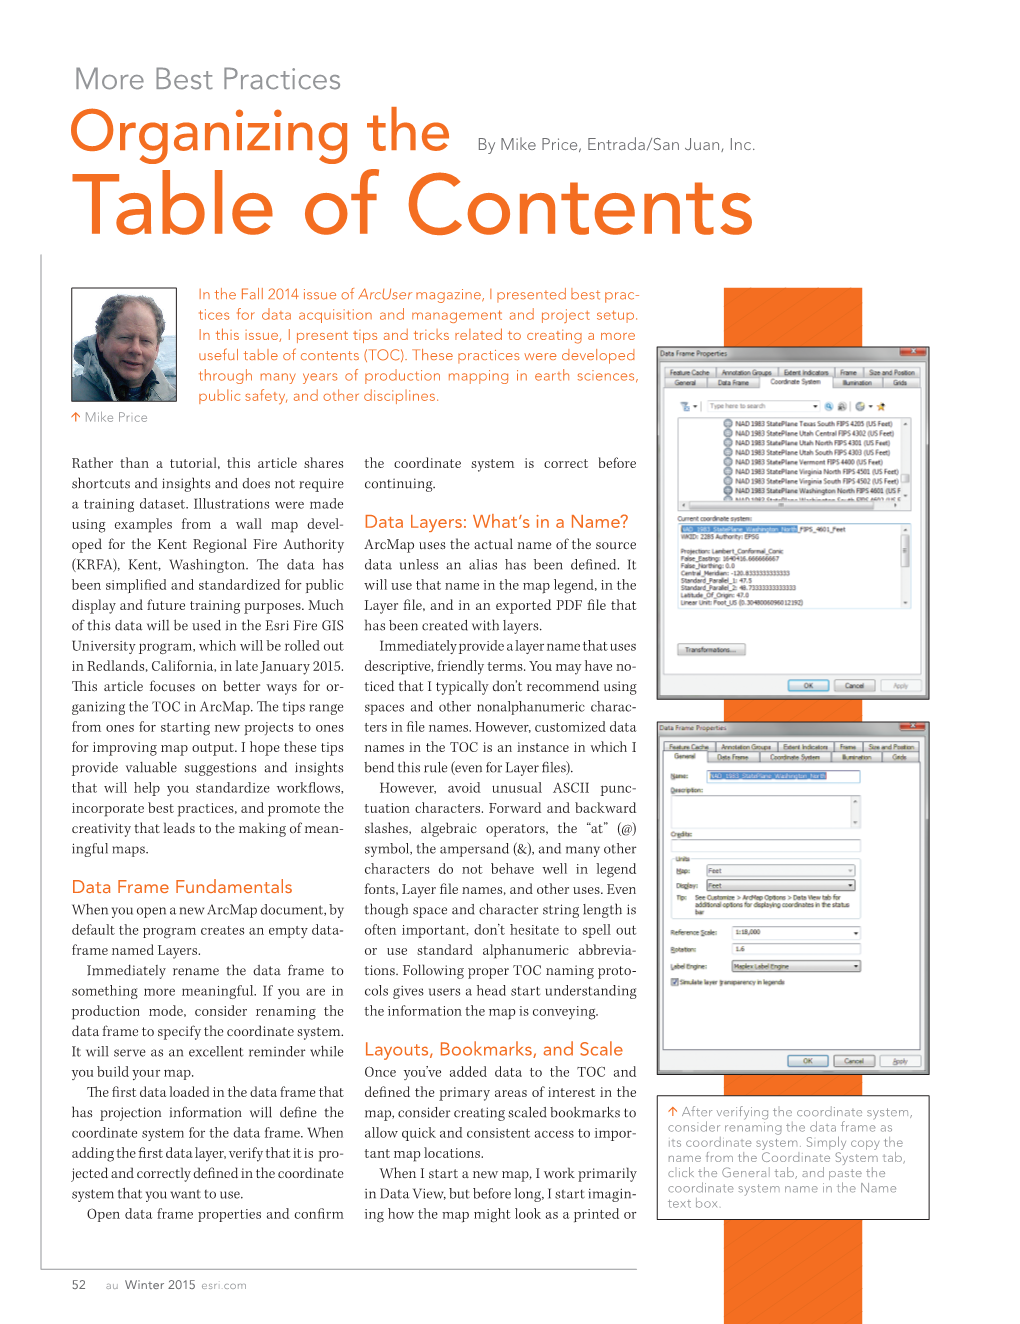 Organizing the Table of Contents